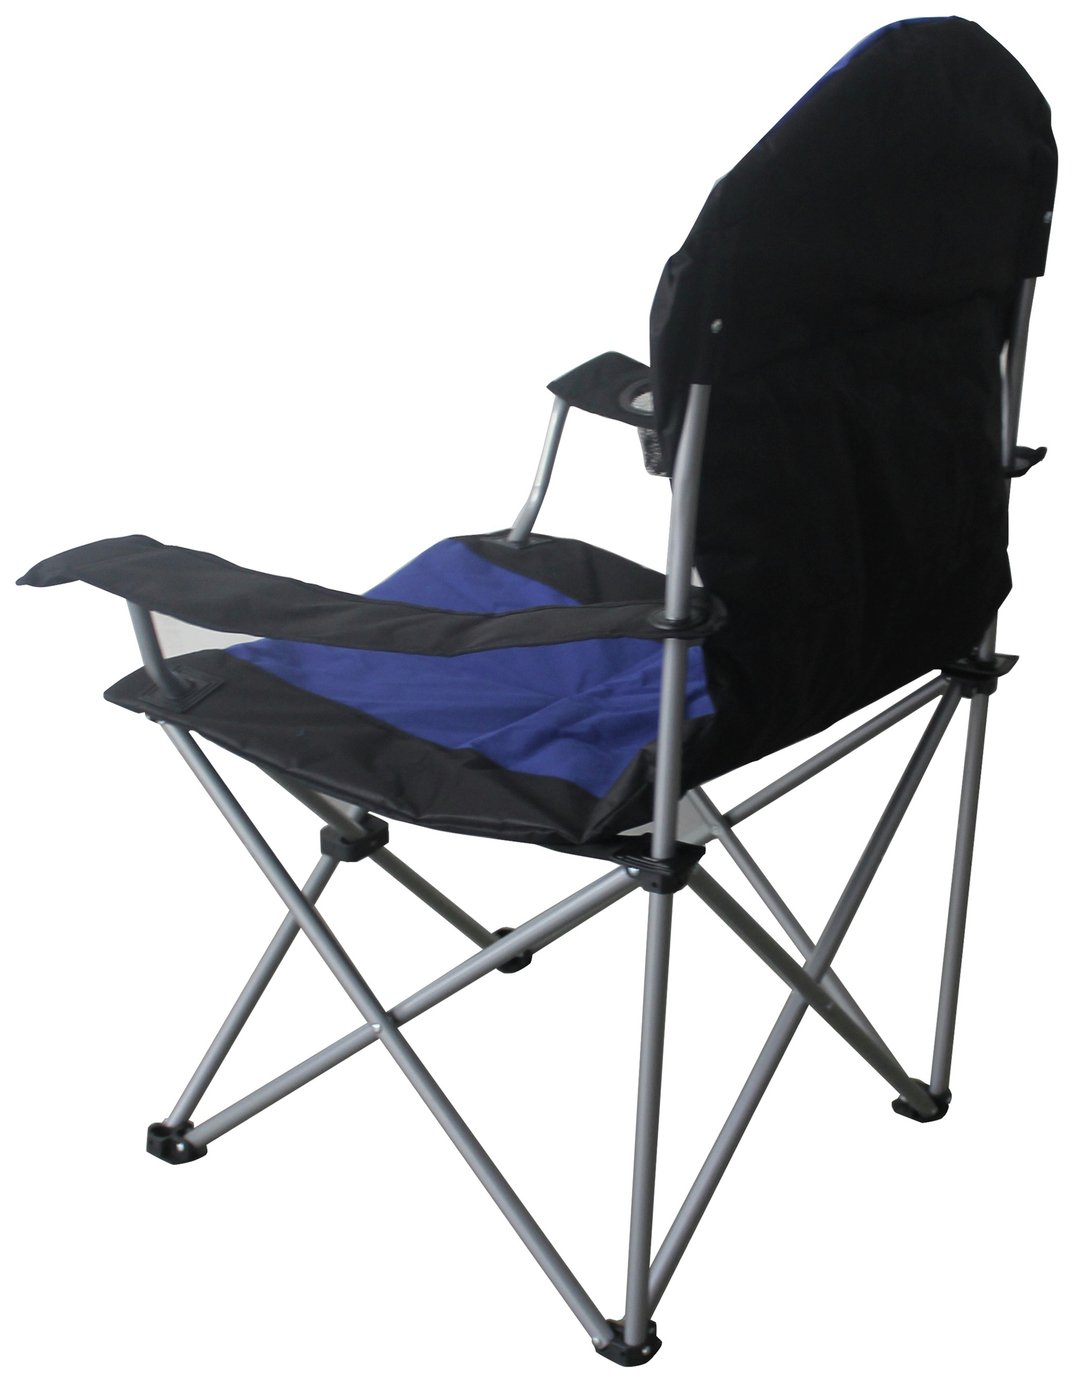 Portable Padded High Back Chair at Argos Reviews